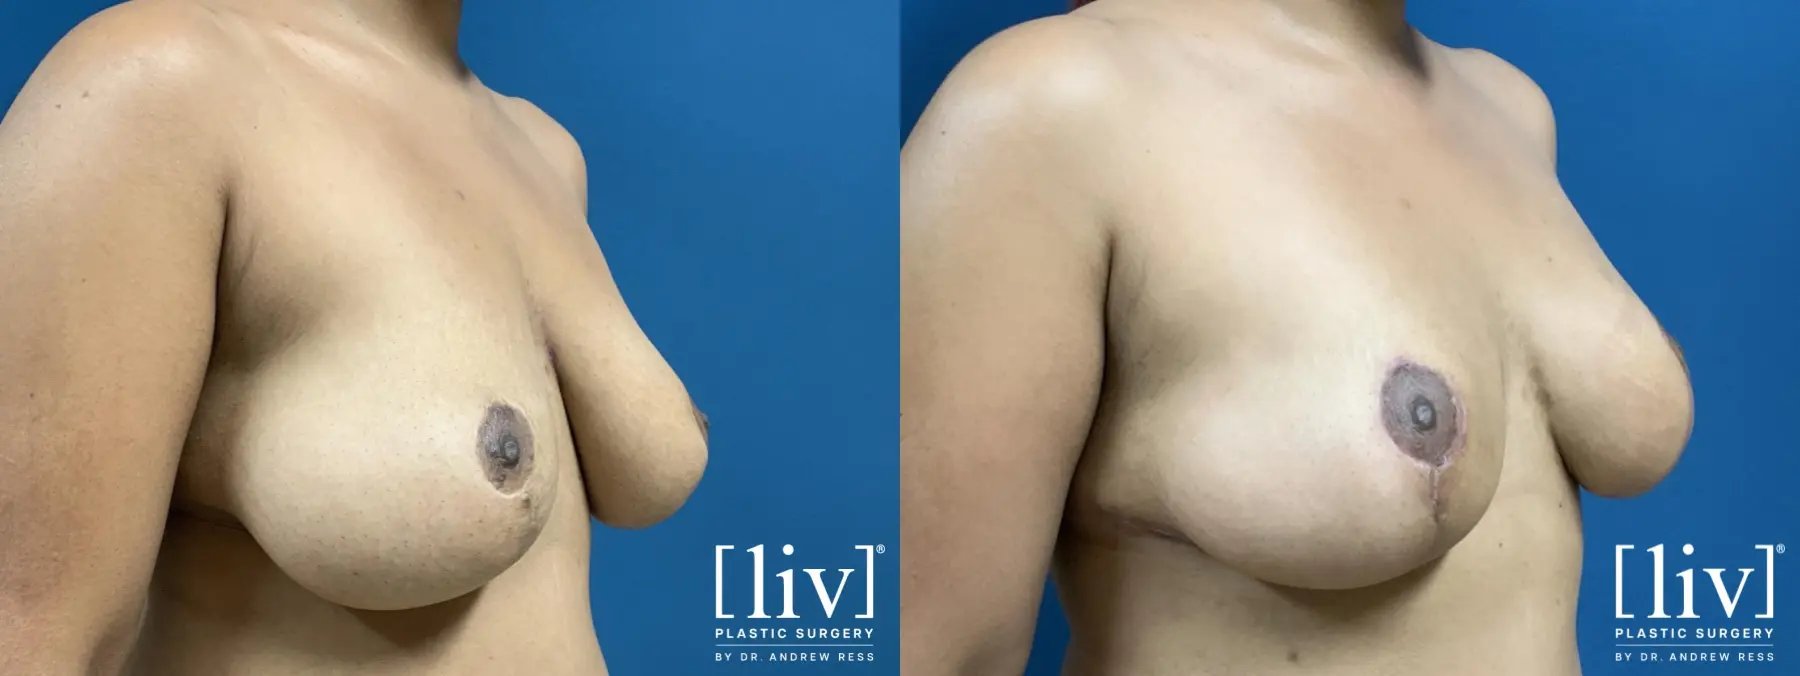 Breast Lift - Before and After 4